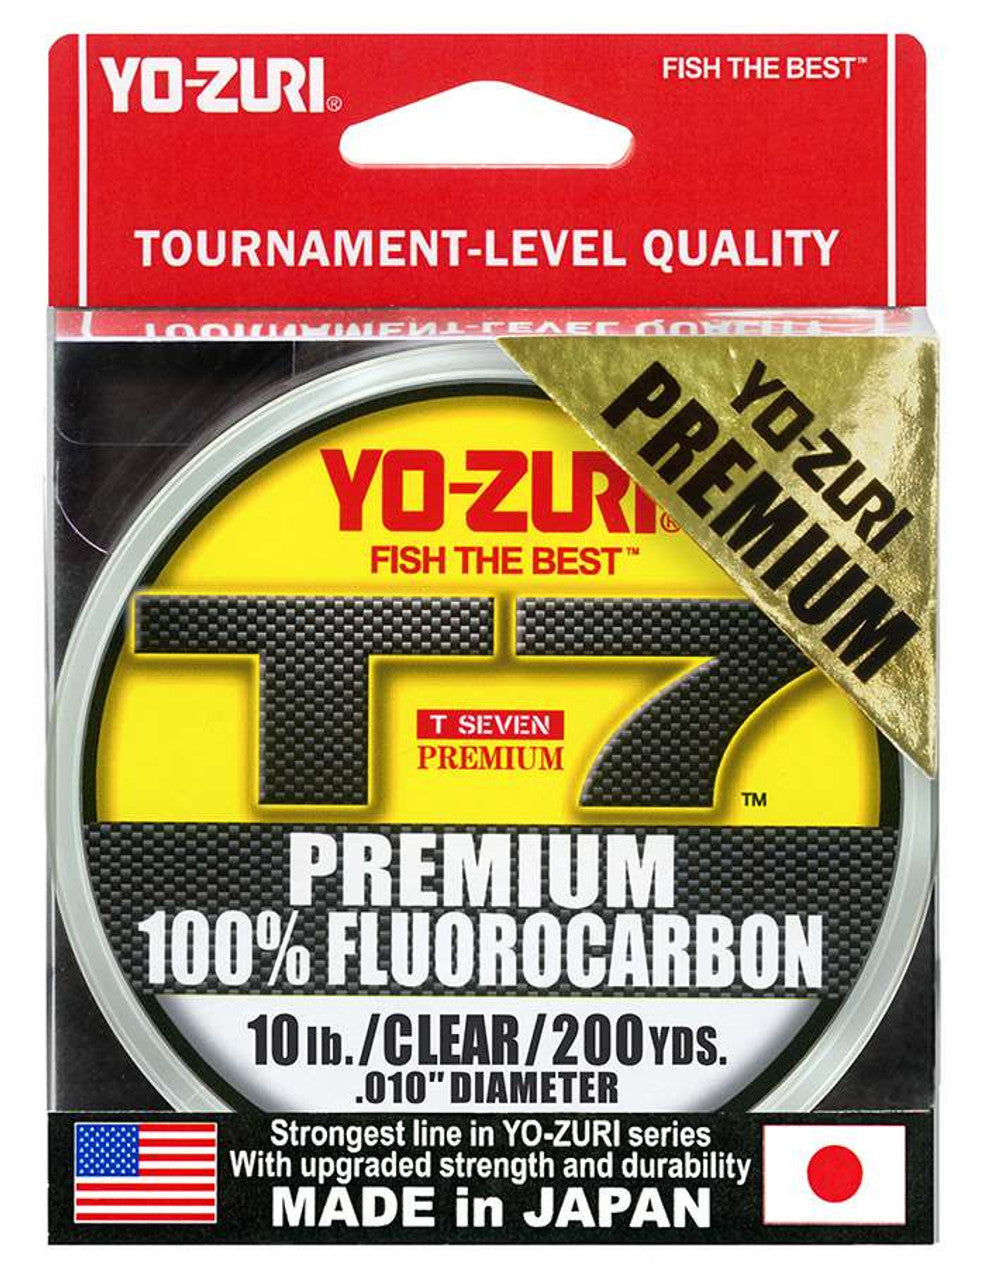  Catch Co Googan Squad 100% Pure Fluorocarbon (Fluoro) Fishing  Line, 200yd (6lb) : Sports & Outdoors